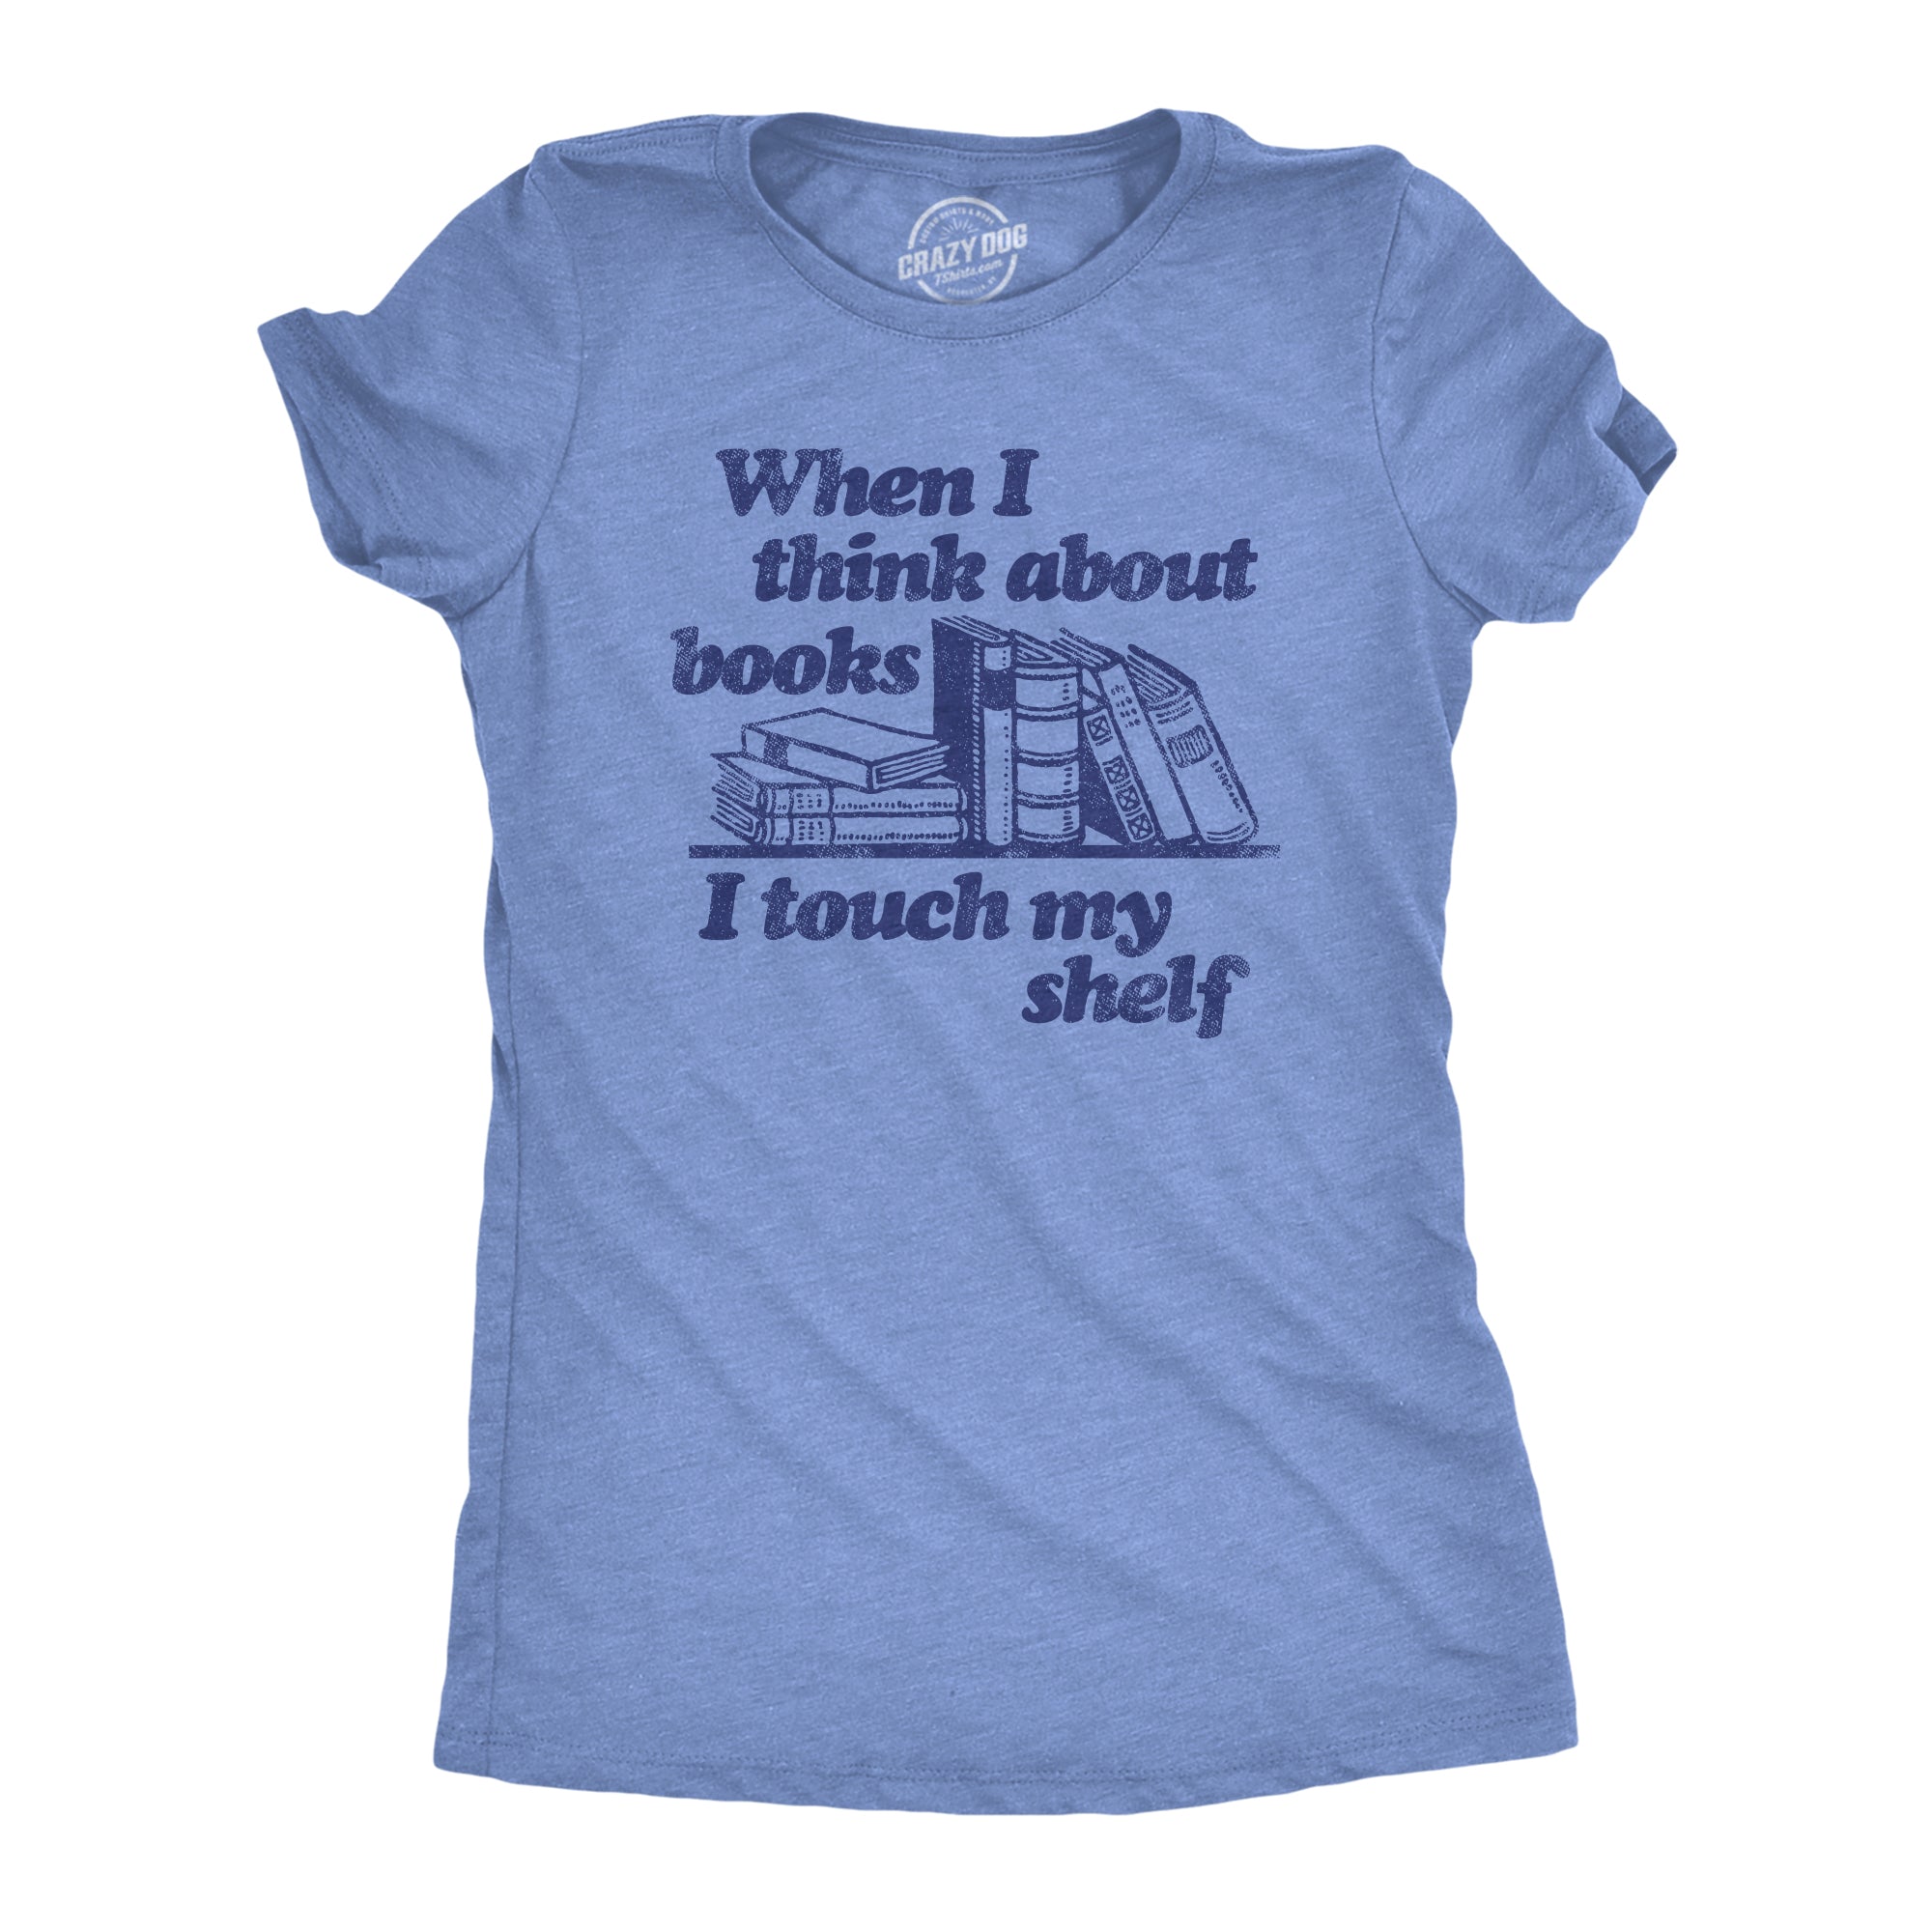 Funny Light Heather Blue When I Think About Books I Touch My Shelf Womens T Shirt Nerdy Sex Nerdy Tee